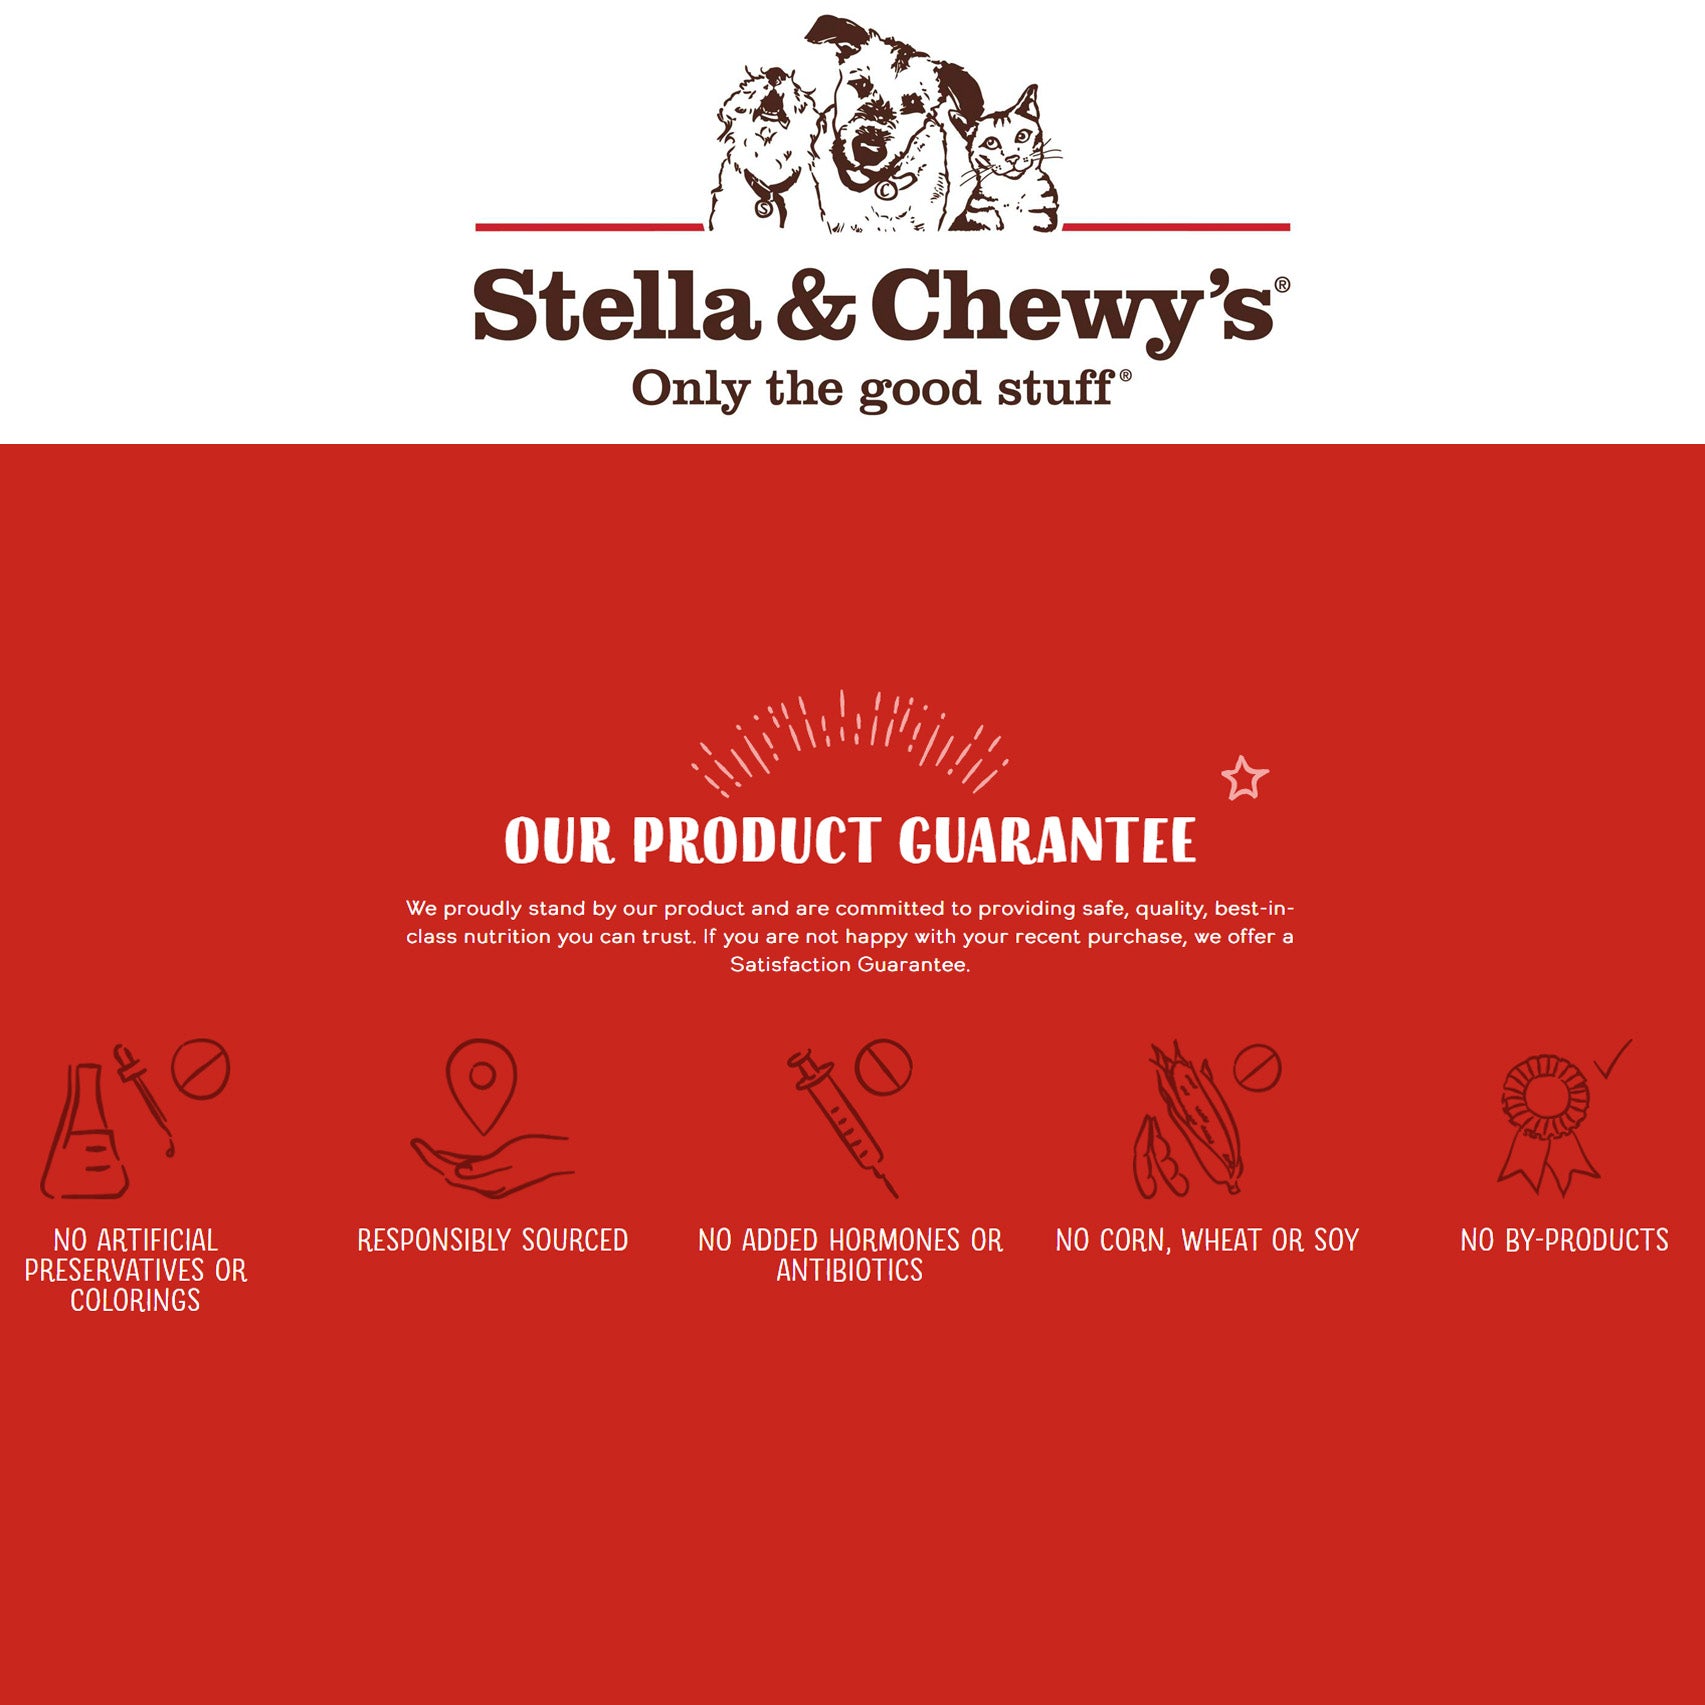 Stella & Chewy's Venison Blend Dinner Patties Freeze-Dried Dog Food